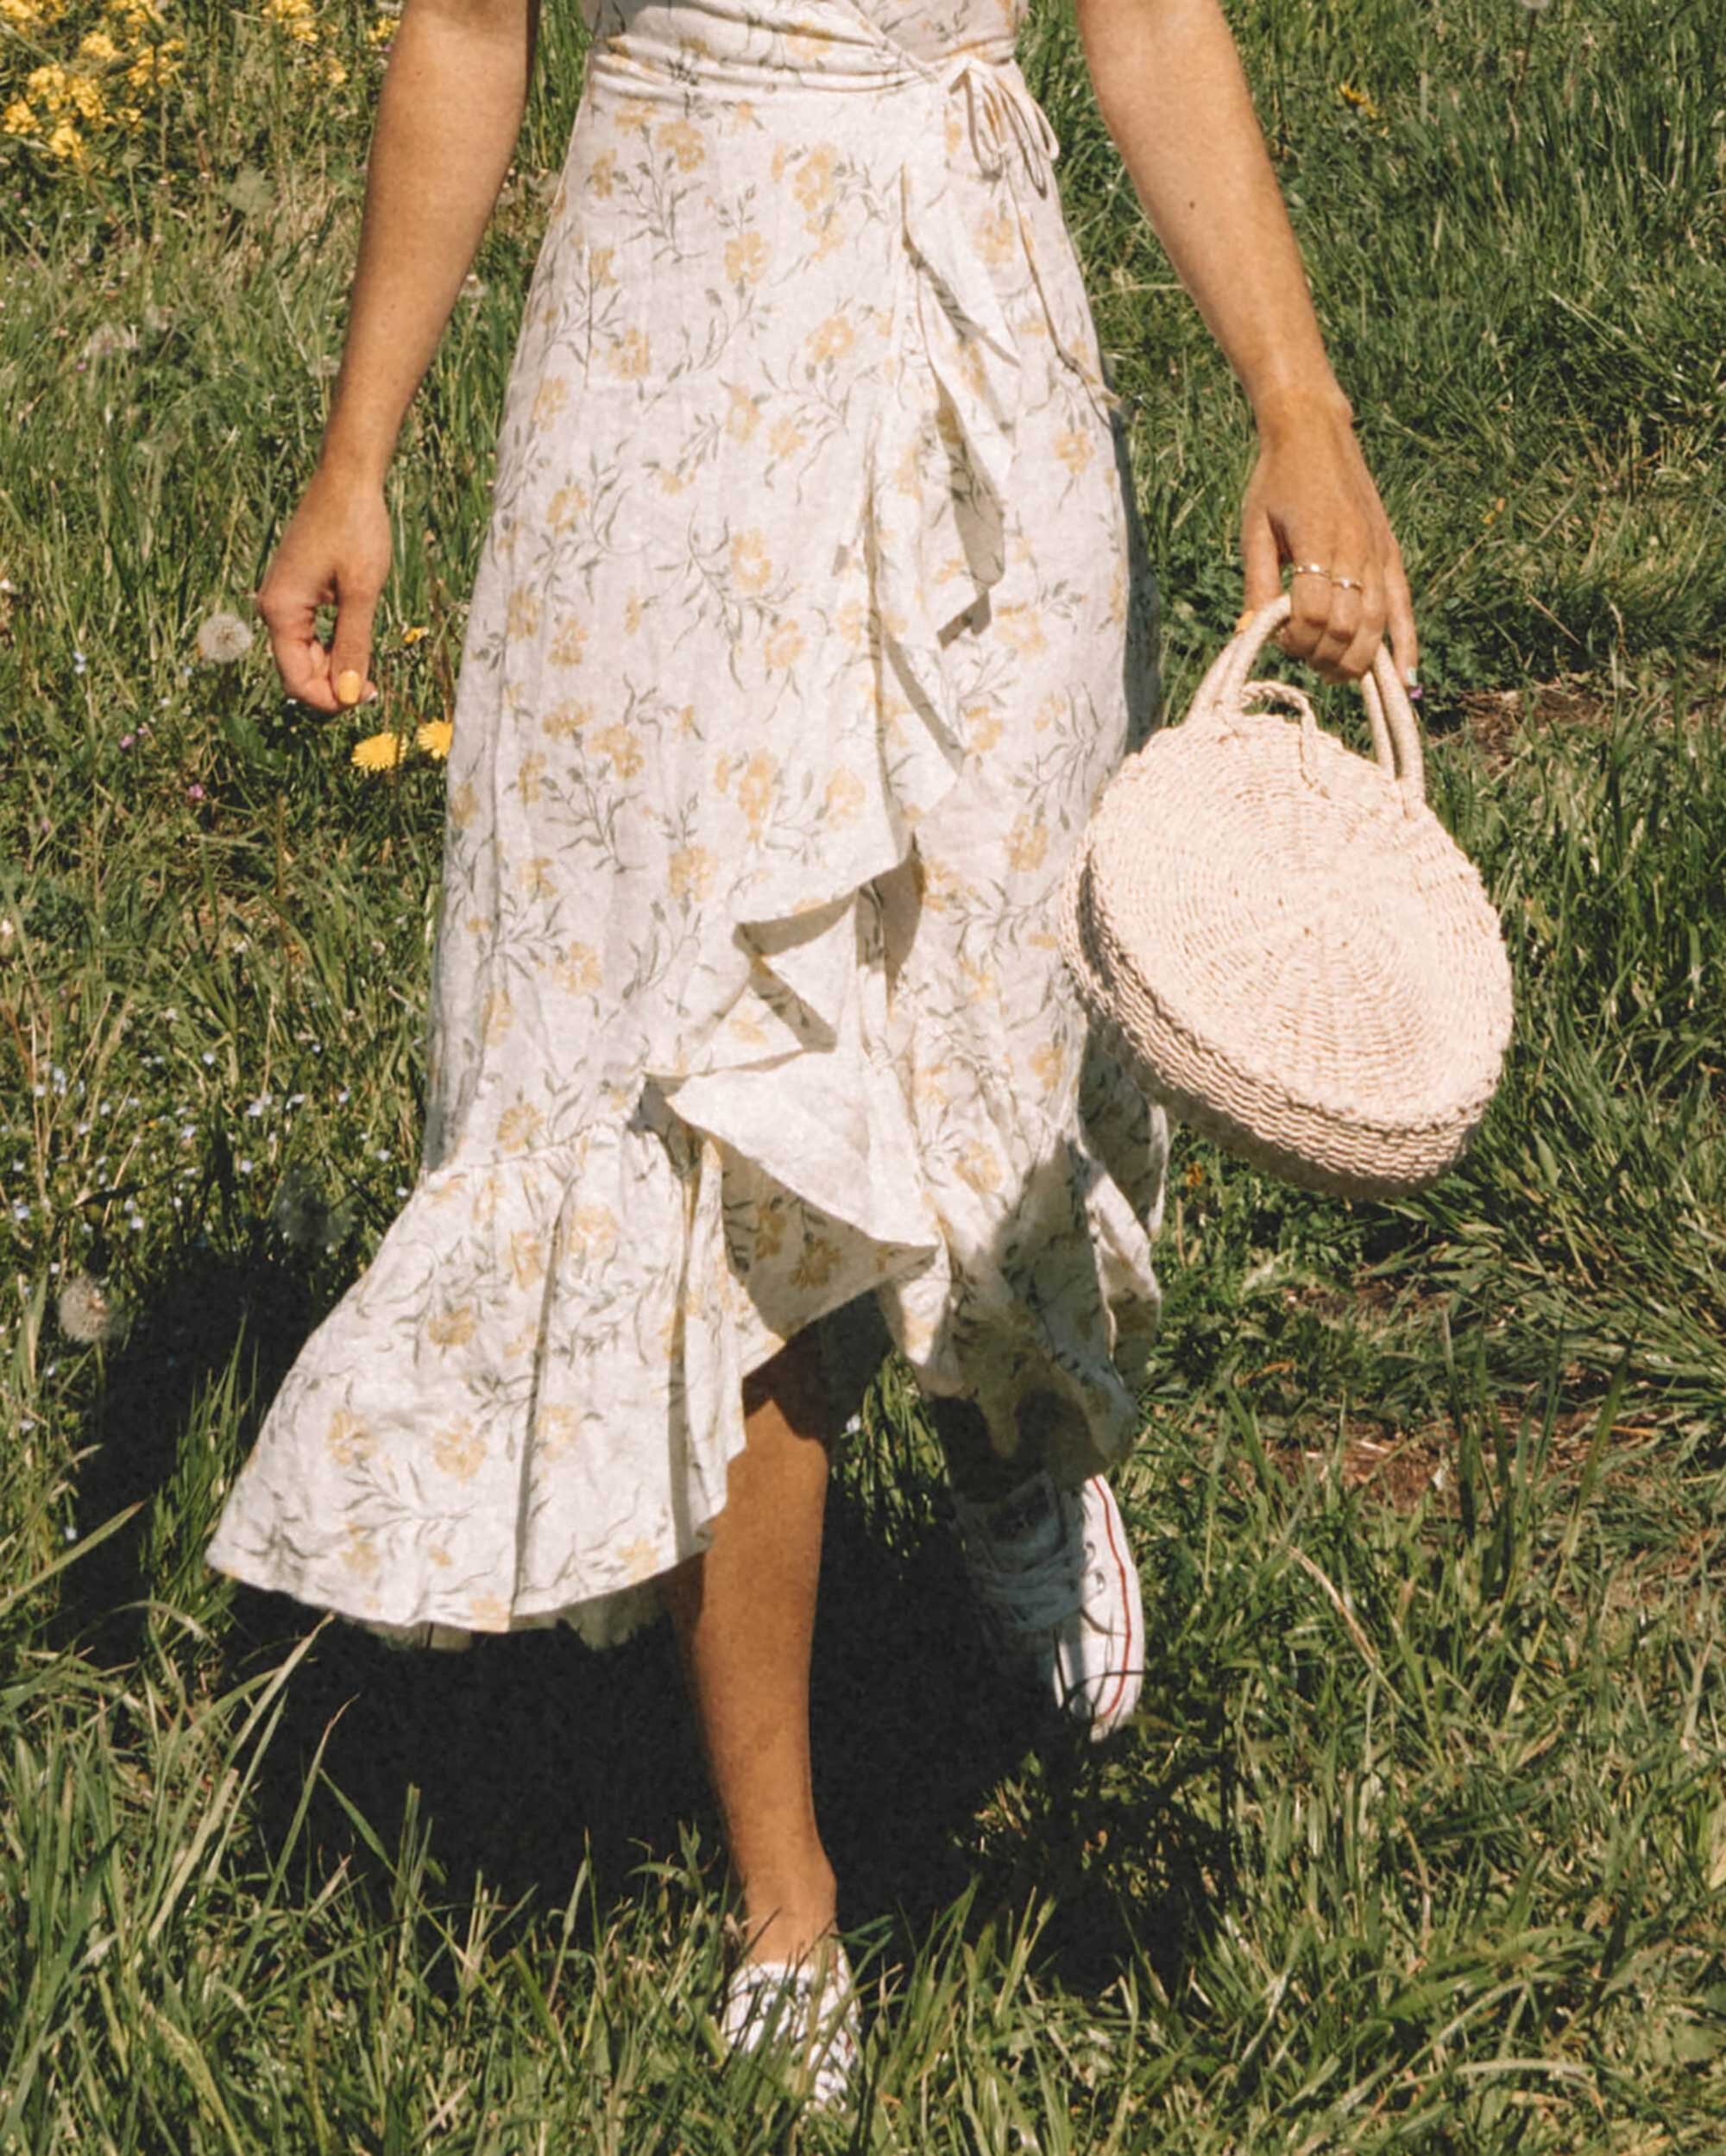 Sarah+Butler+of+Sarah+Styles+Seattle+wears+And+Other+Stories+Ruffled+Linen+Wrap+Midi+Dress+and+round+woven+bag+in+England+Countryside+for+the+perfect+floral+summer+dress+|+@sarahchristine+-1.jpg